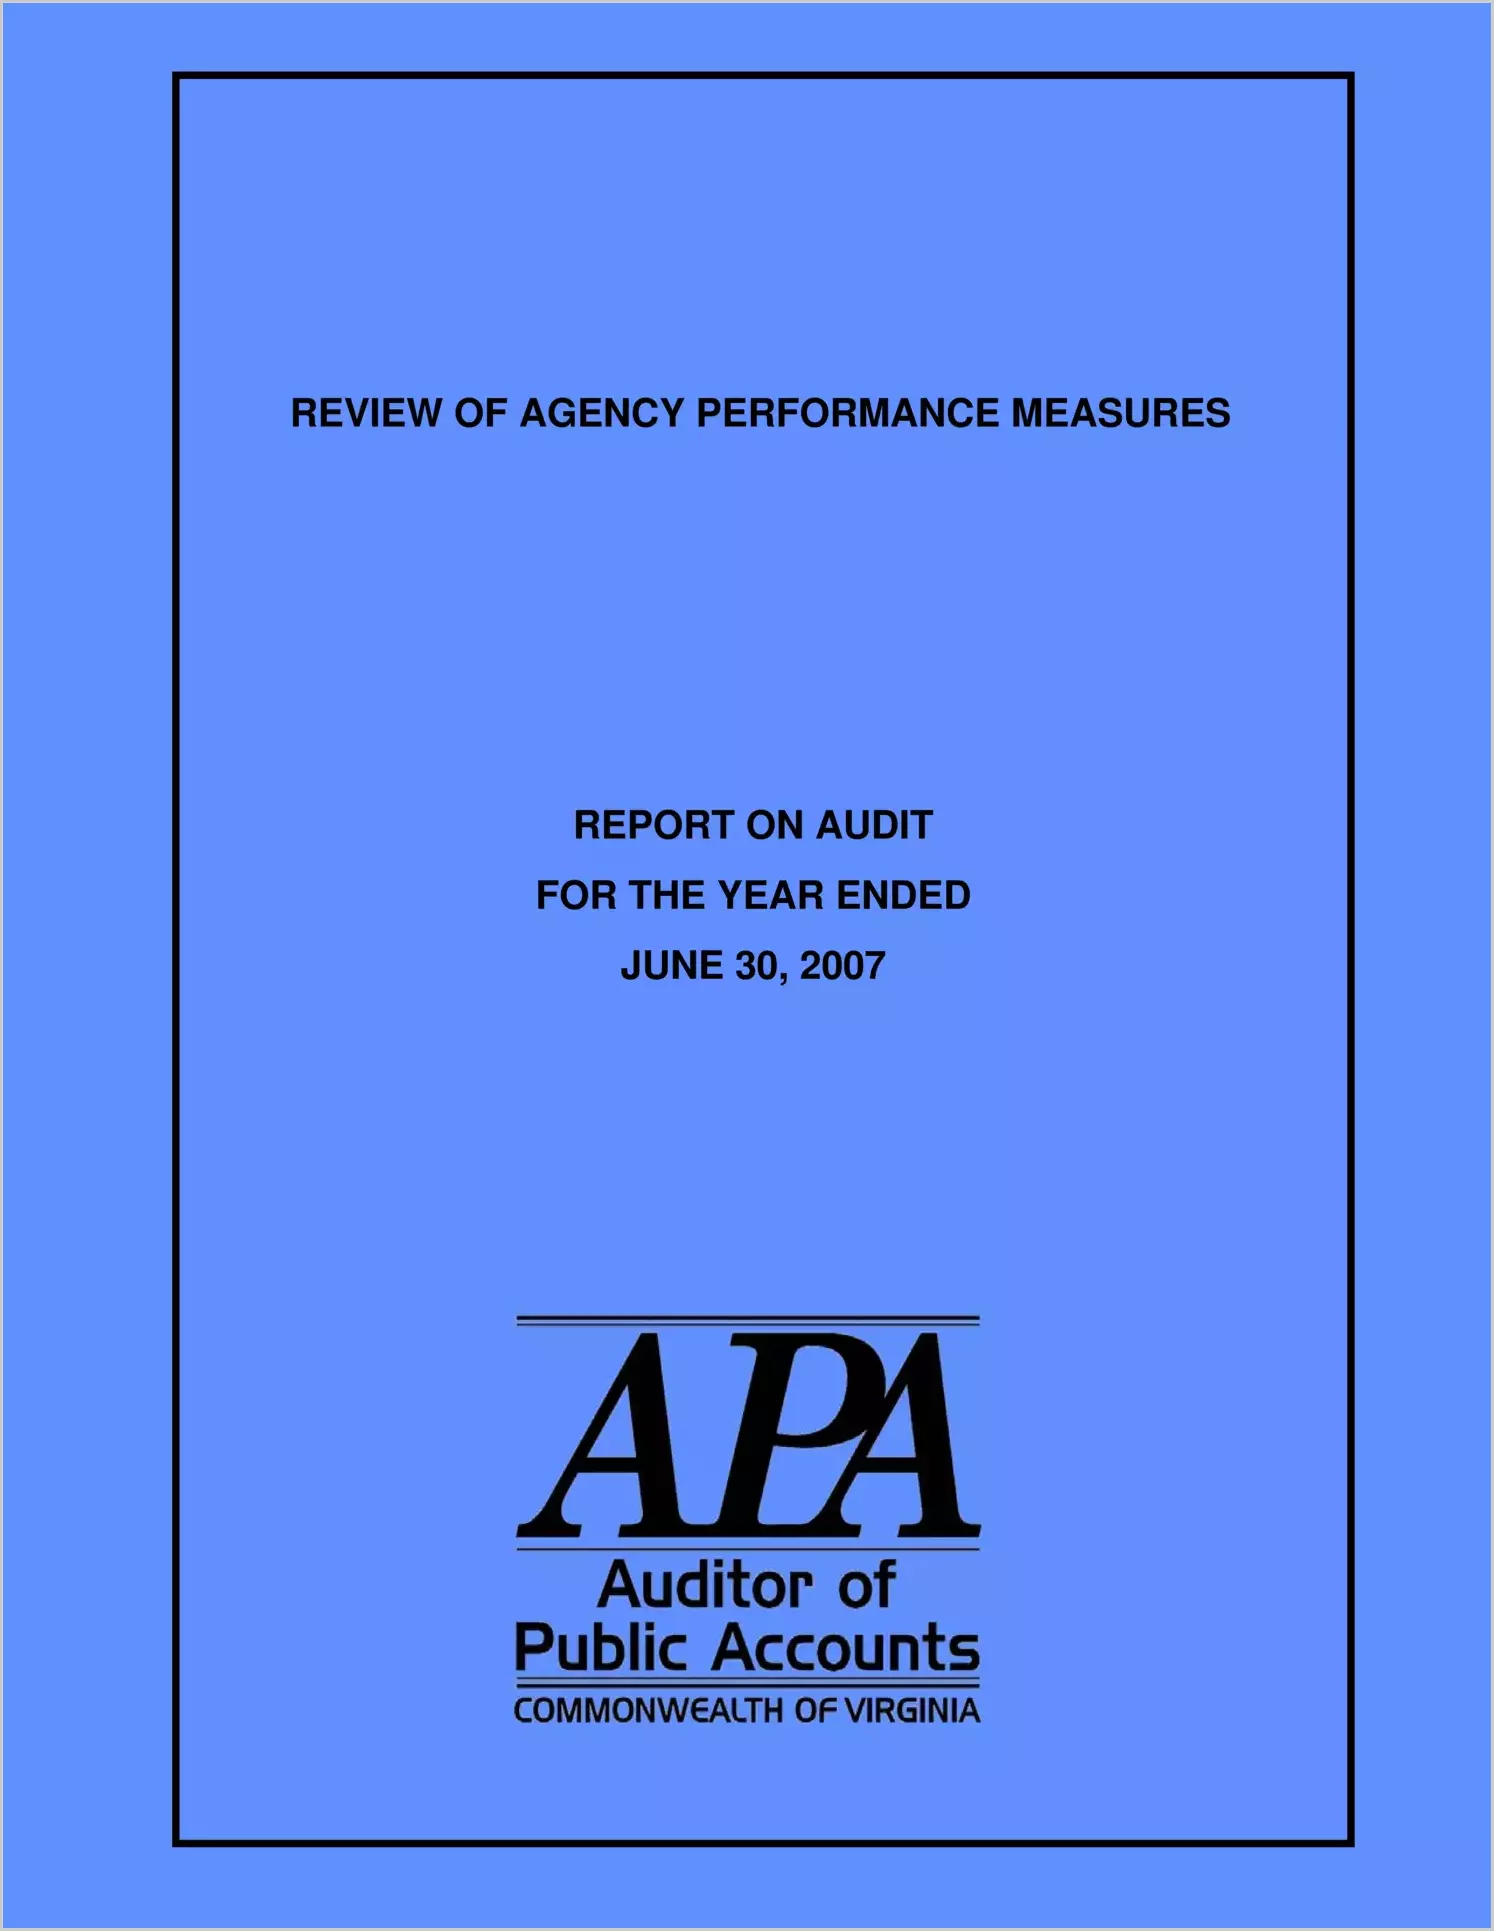 Review of Agency Performance Measures report on Audit for the year ended June 30, 2007.